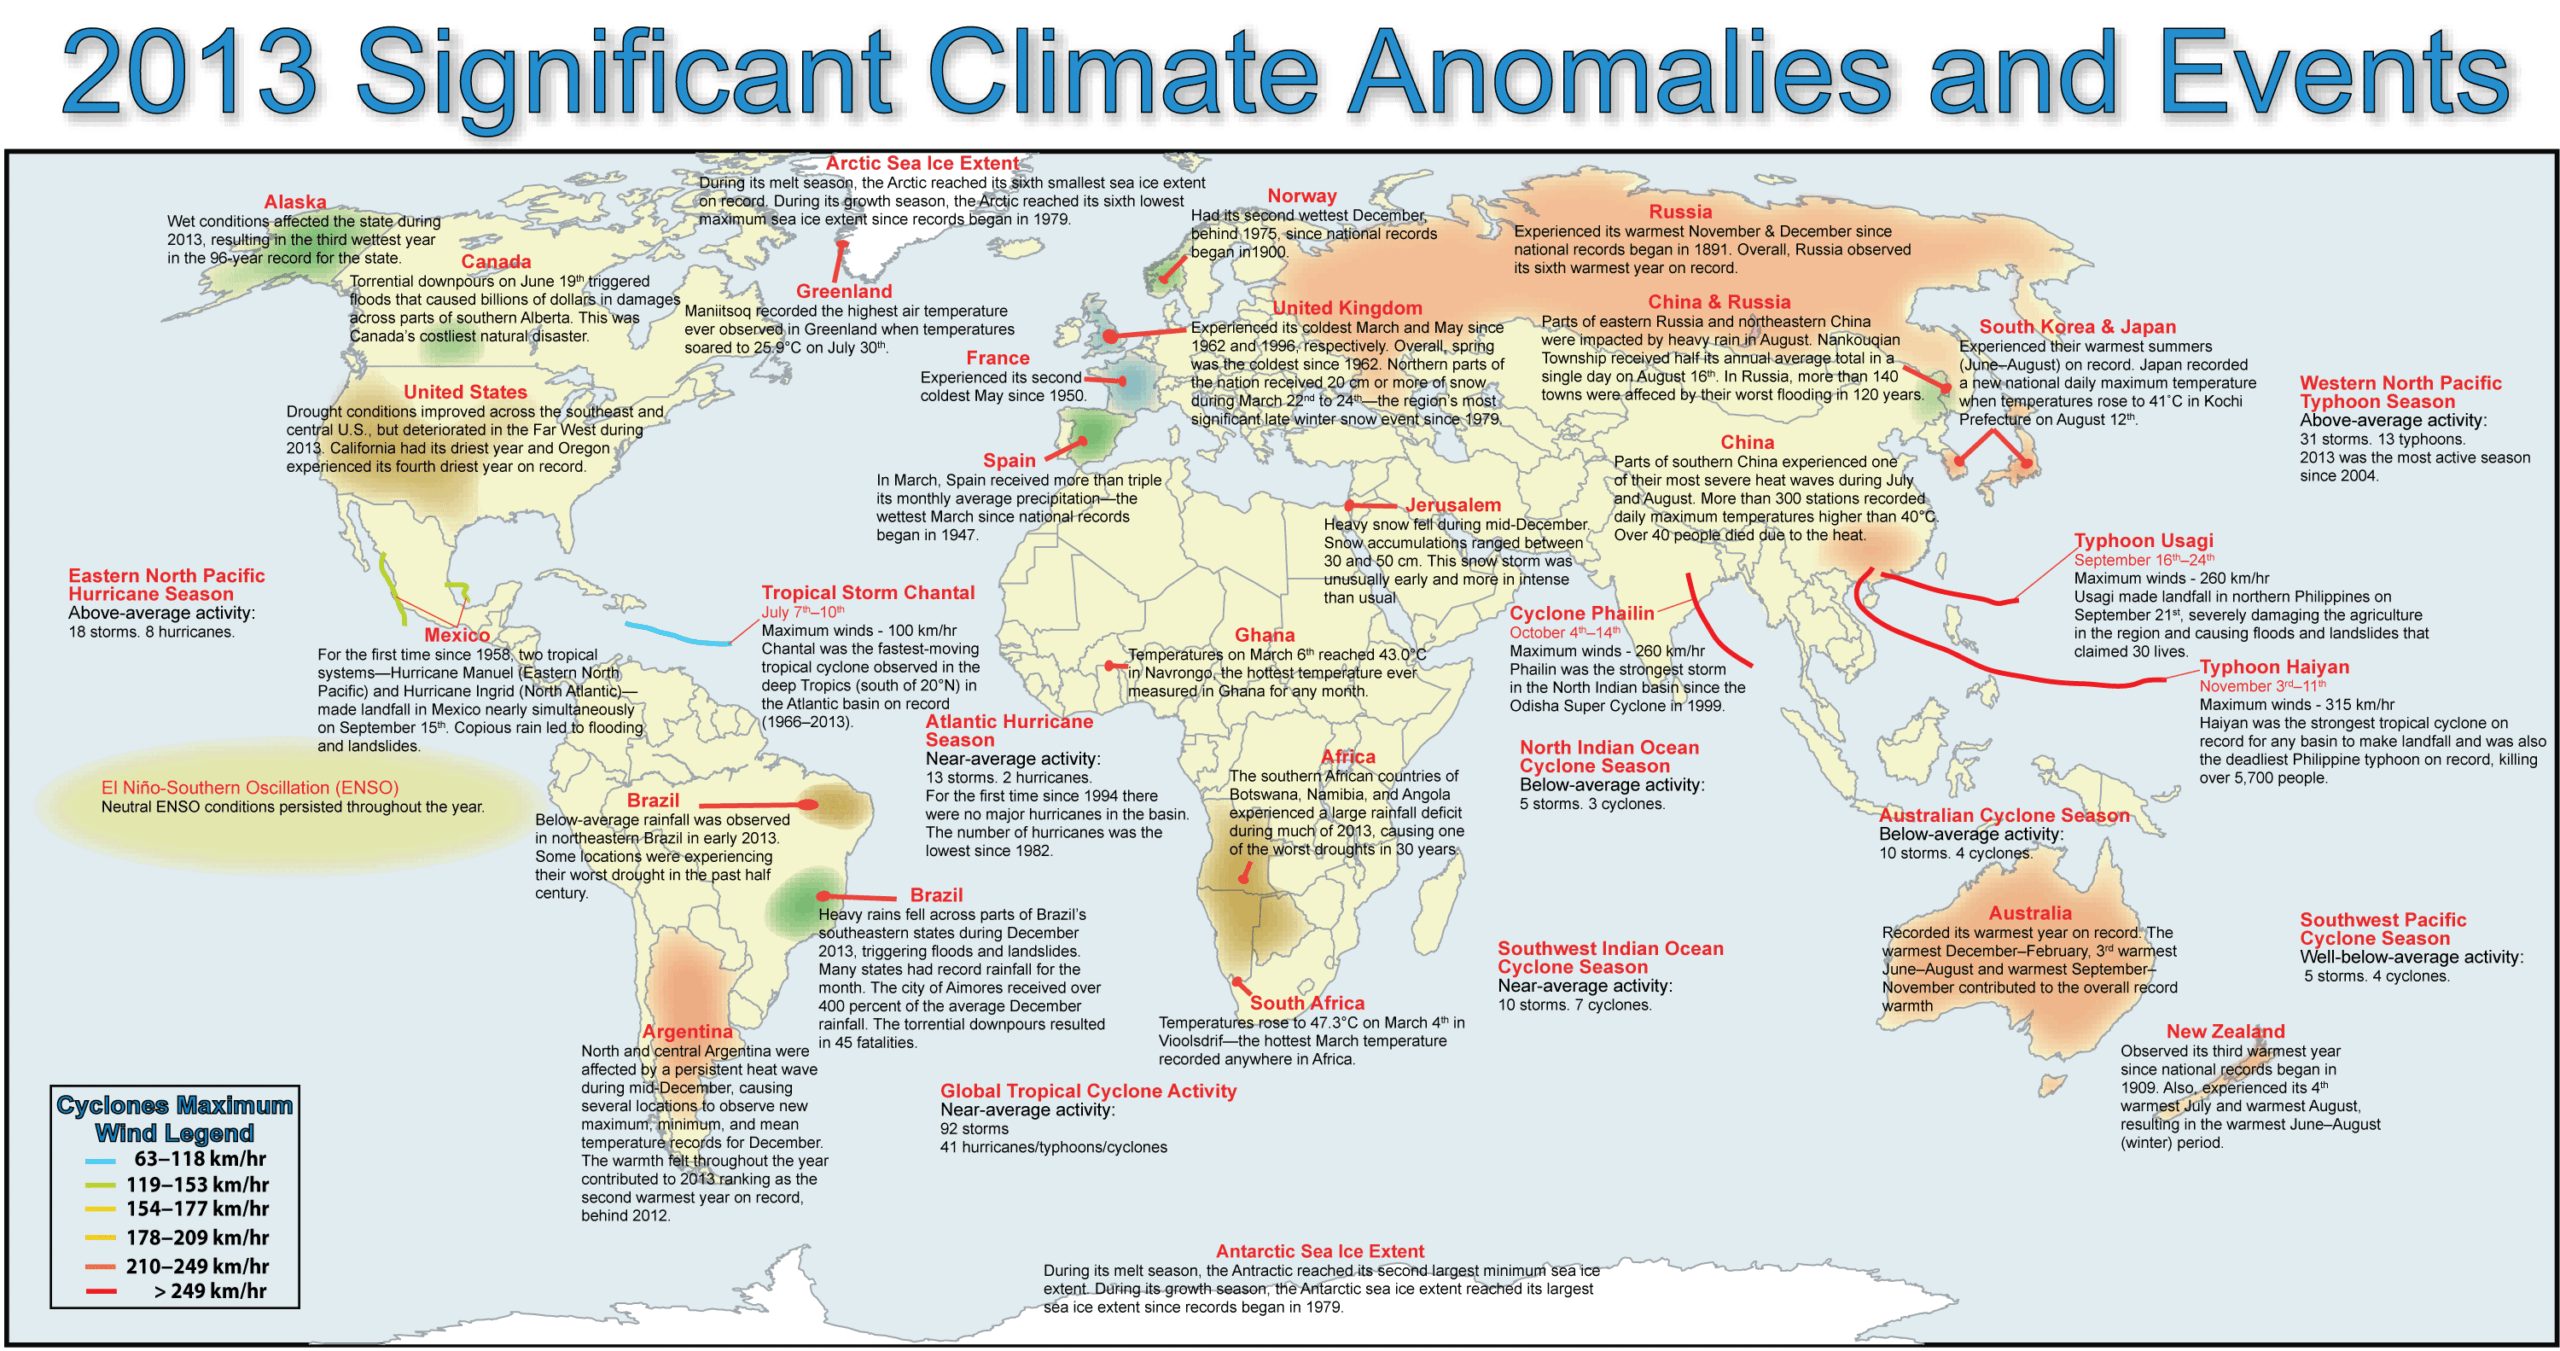 Significant Climate Anomalies and Events in 2013